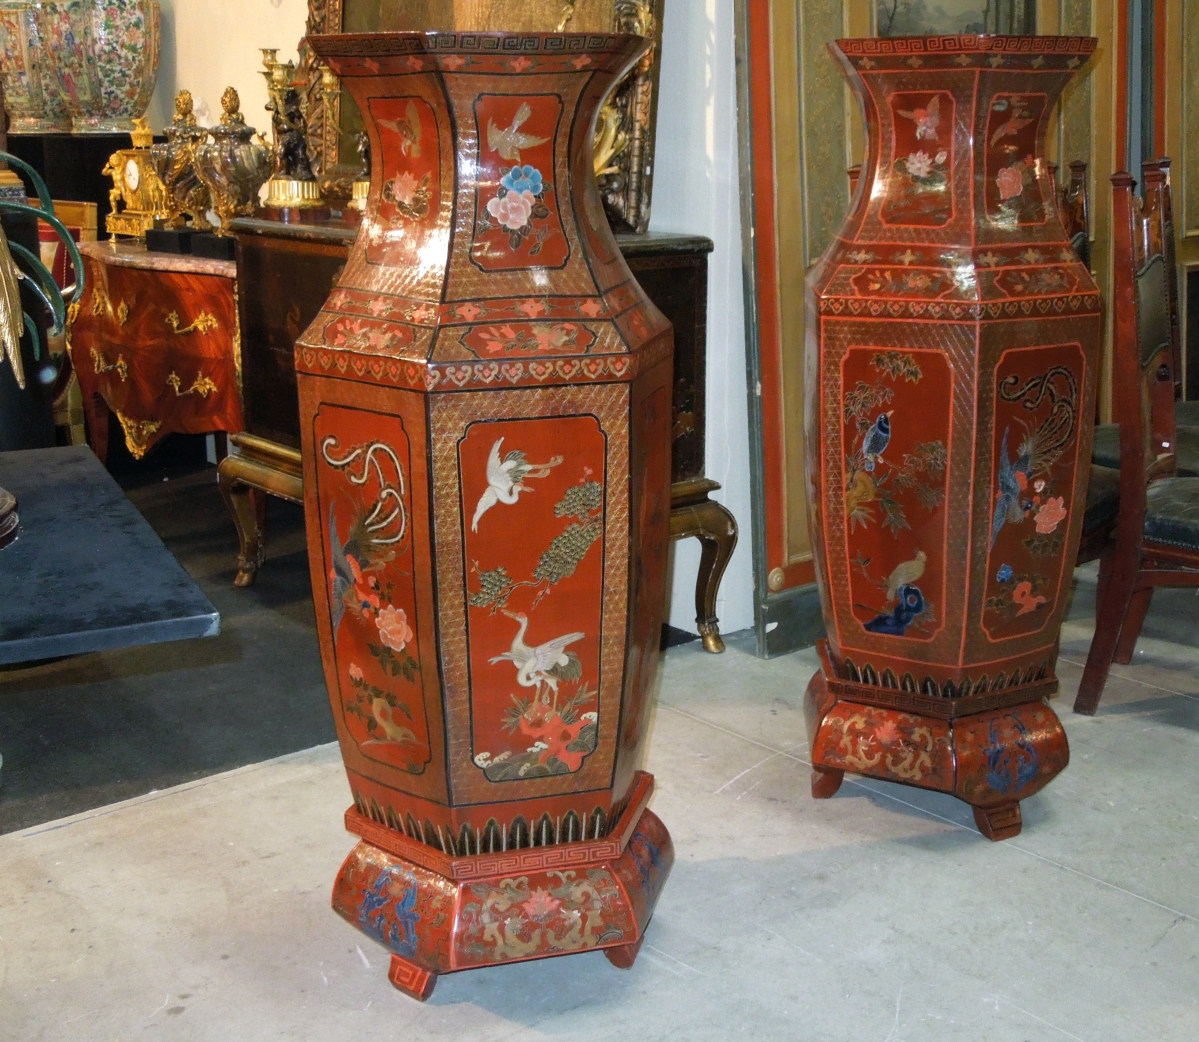 A pair of 5-foot-tall Japanese-style painted urns made in Italy were available from Roberto Cocozza, Rome and Milan, Italy.